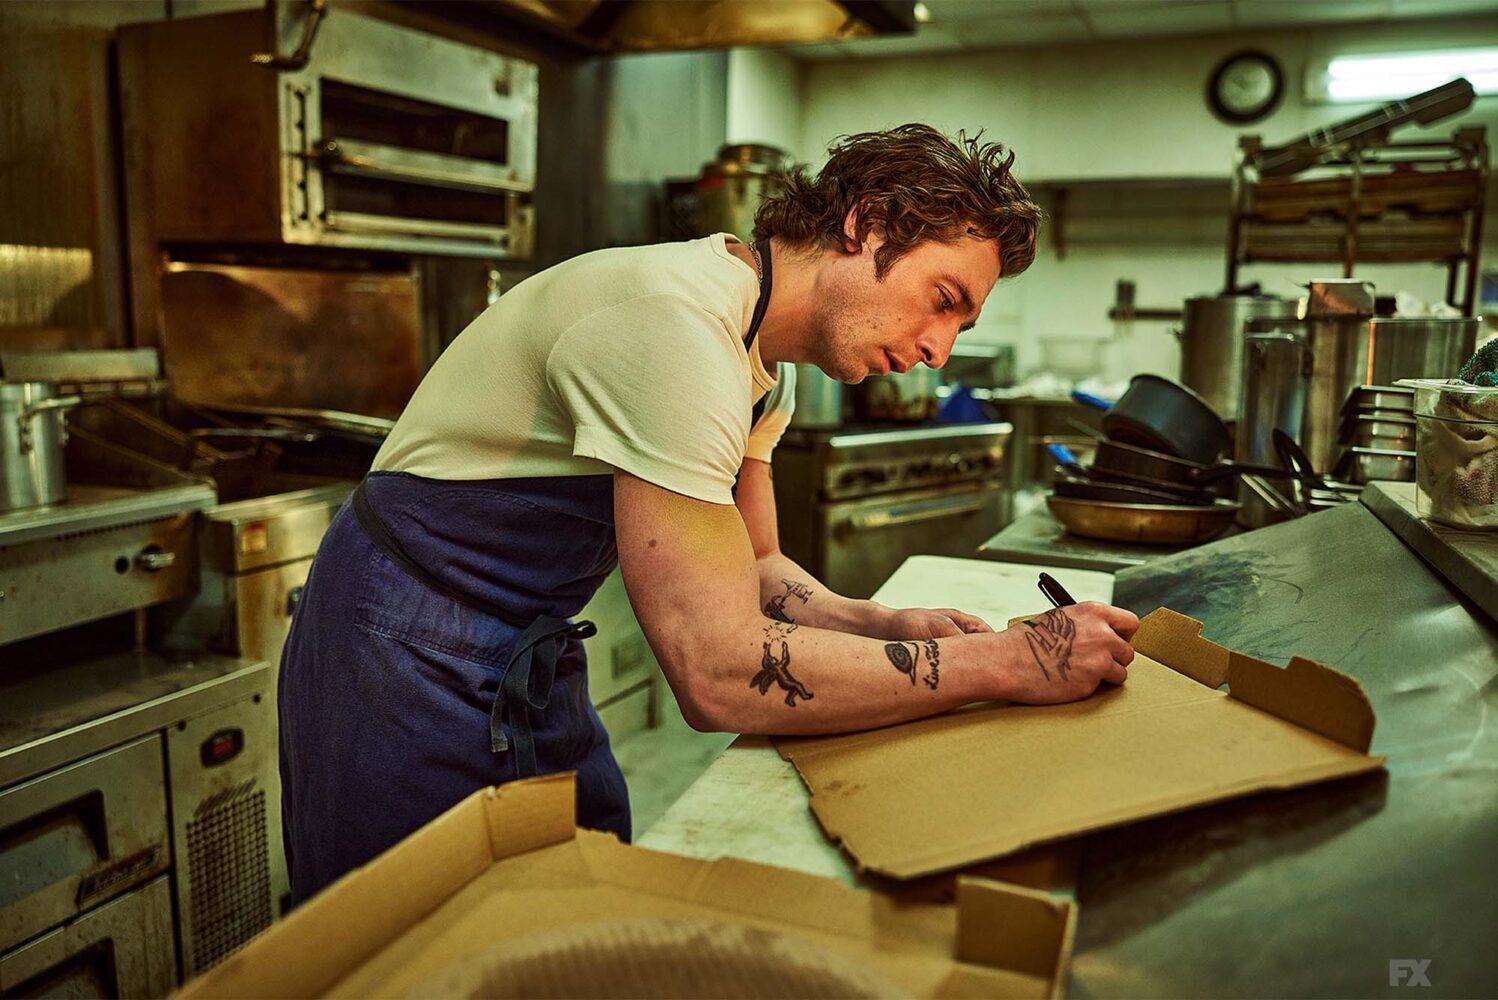 Photo still from FX's The Bear. A young male chef is seen labeling items in a kitchen setting